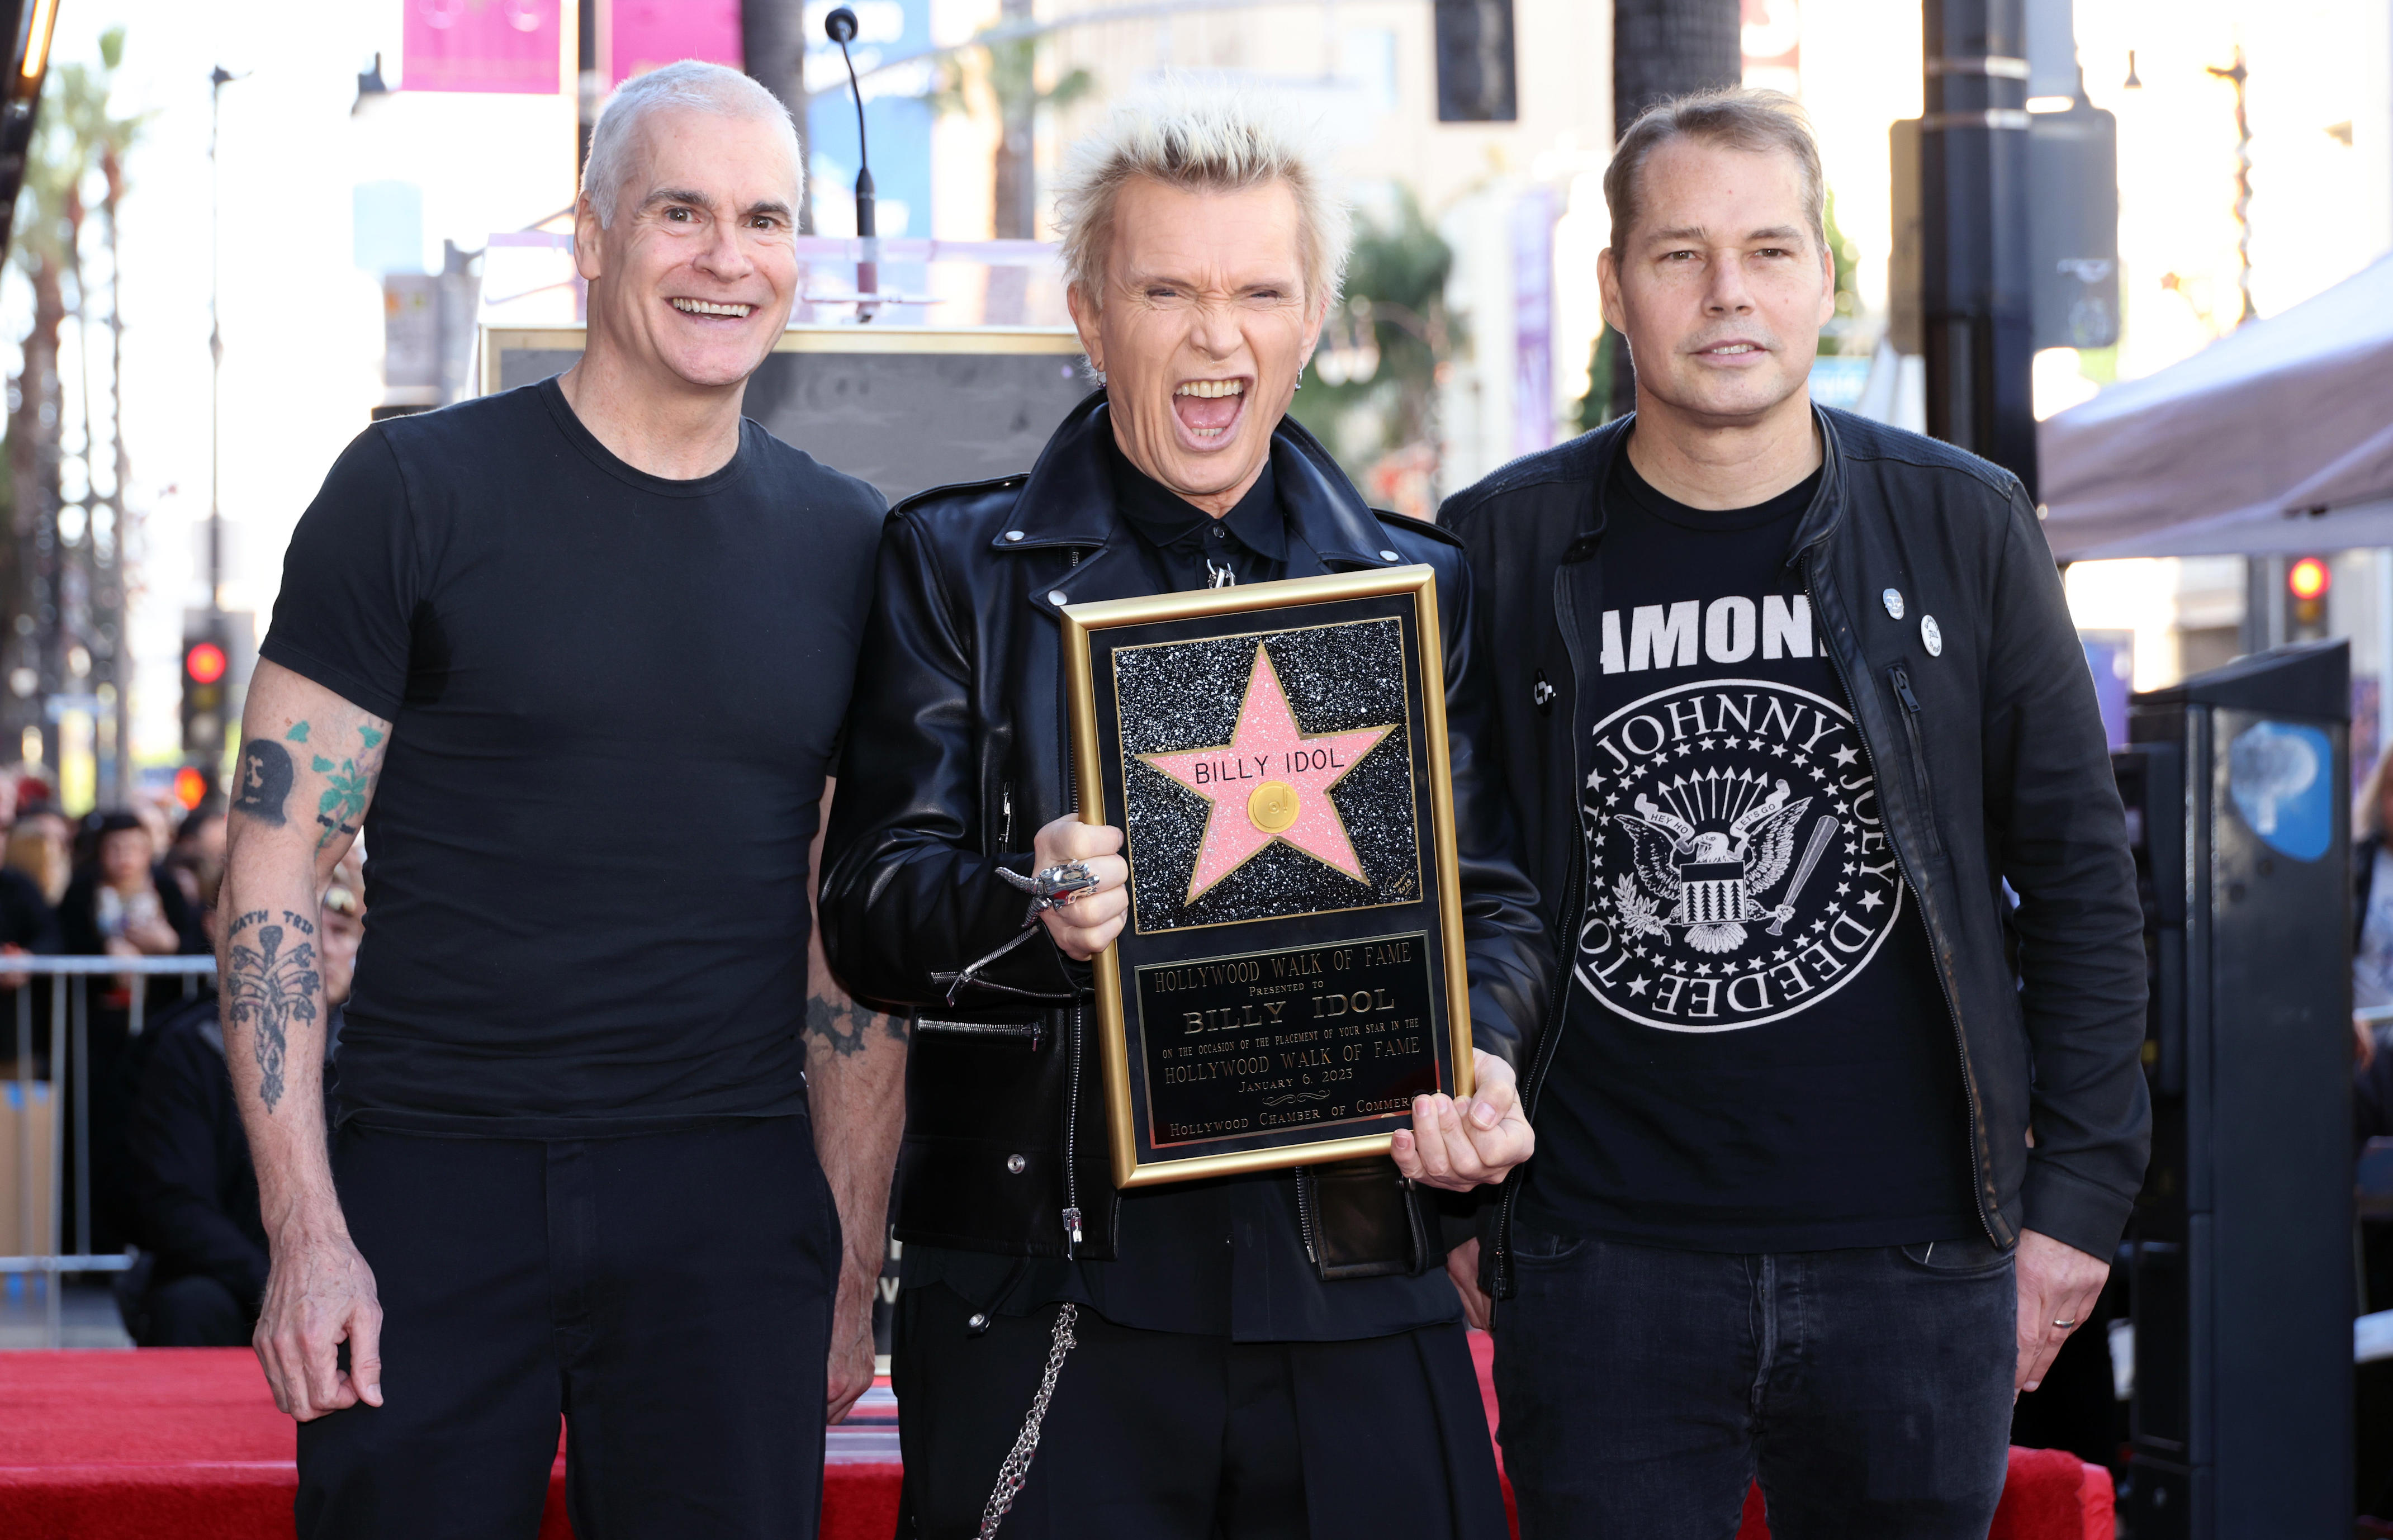 Black Flag singer Henry Rollins (left) and artist Shepard Fairey spoke during Billy Idol's ceremony honoring him with a star on the Hollywood Walk of Fame.